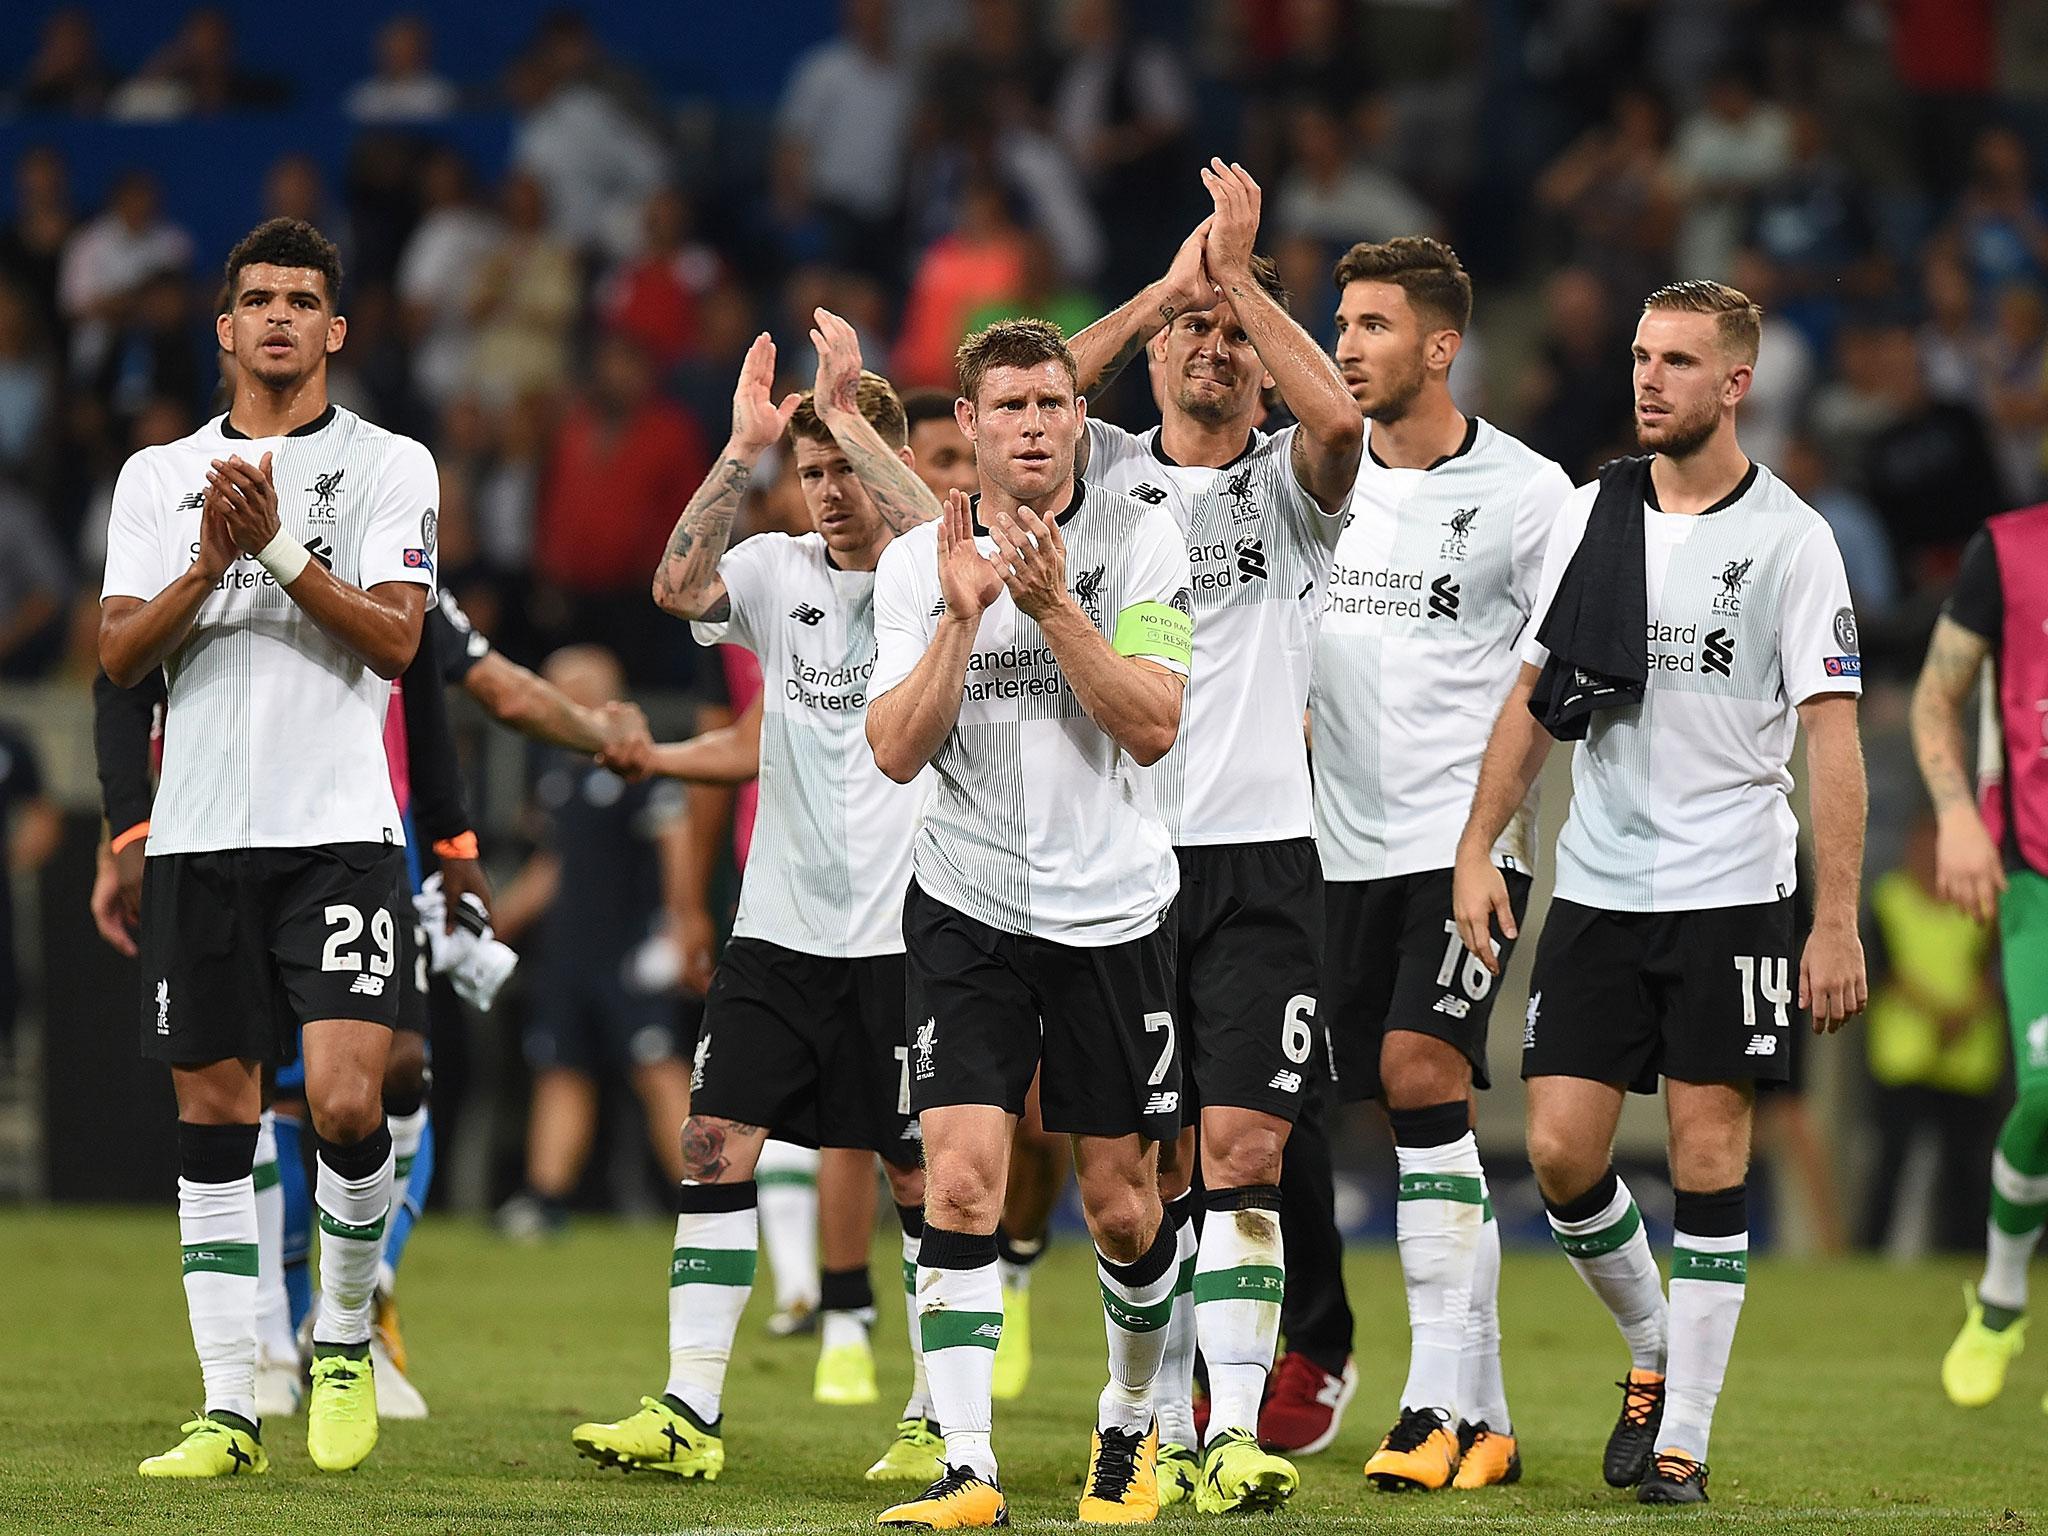 Liverpool left Germany with a big win and two precious away goals